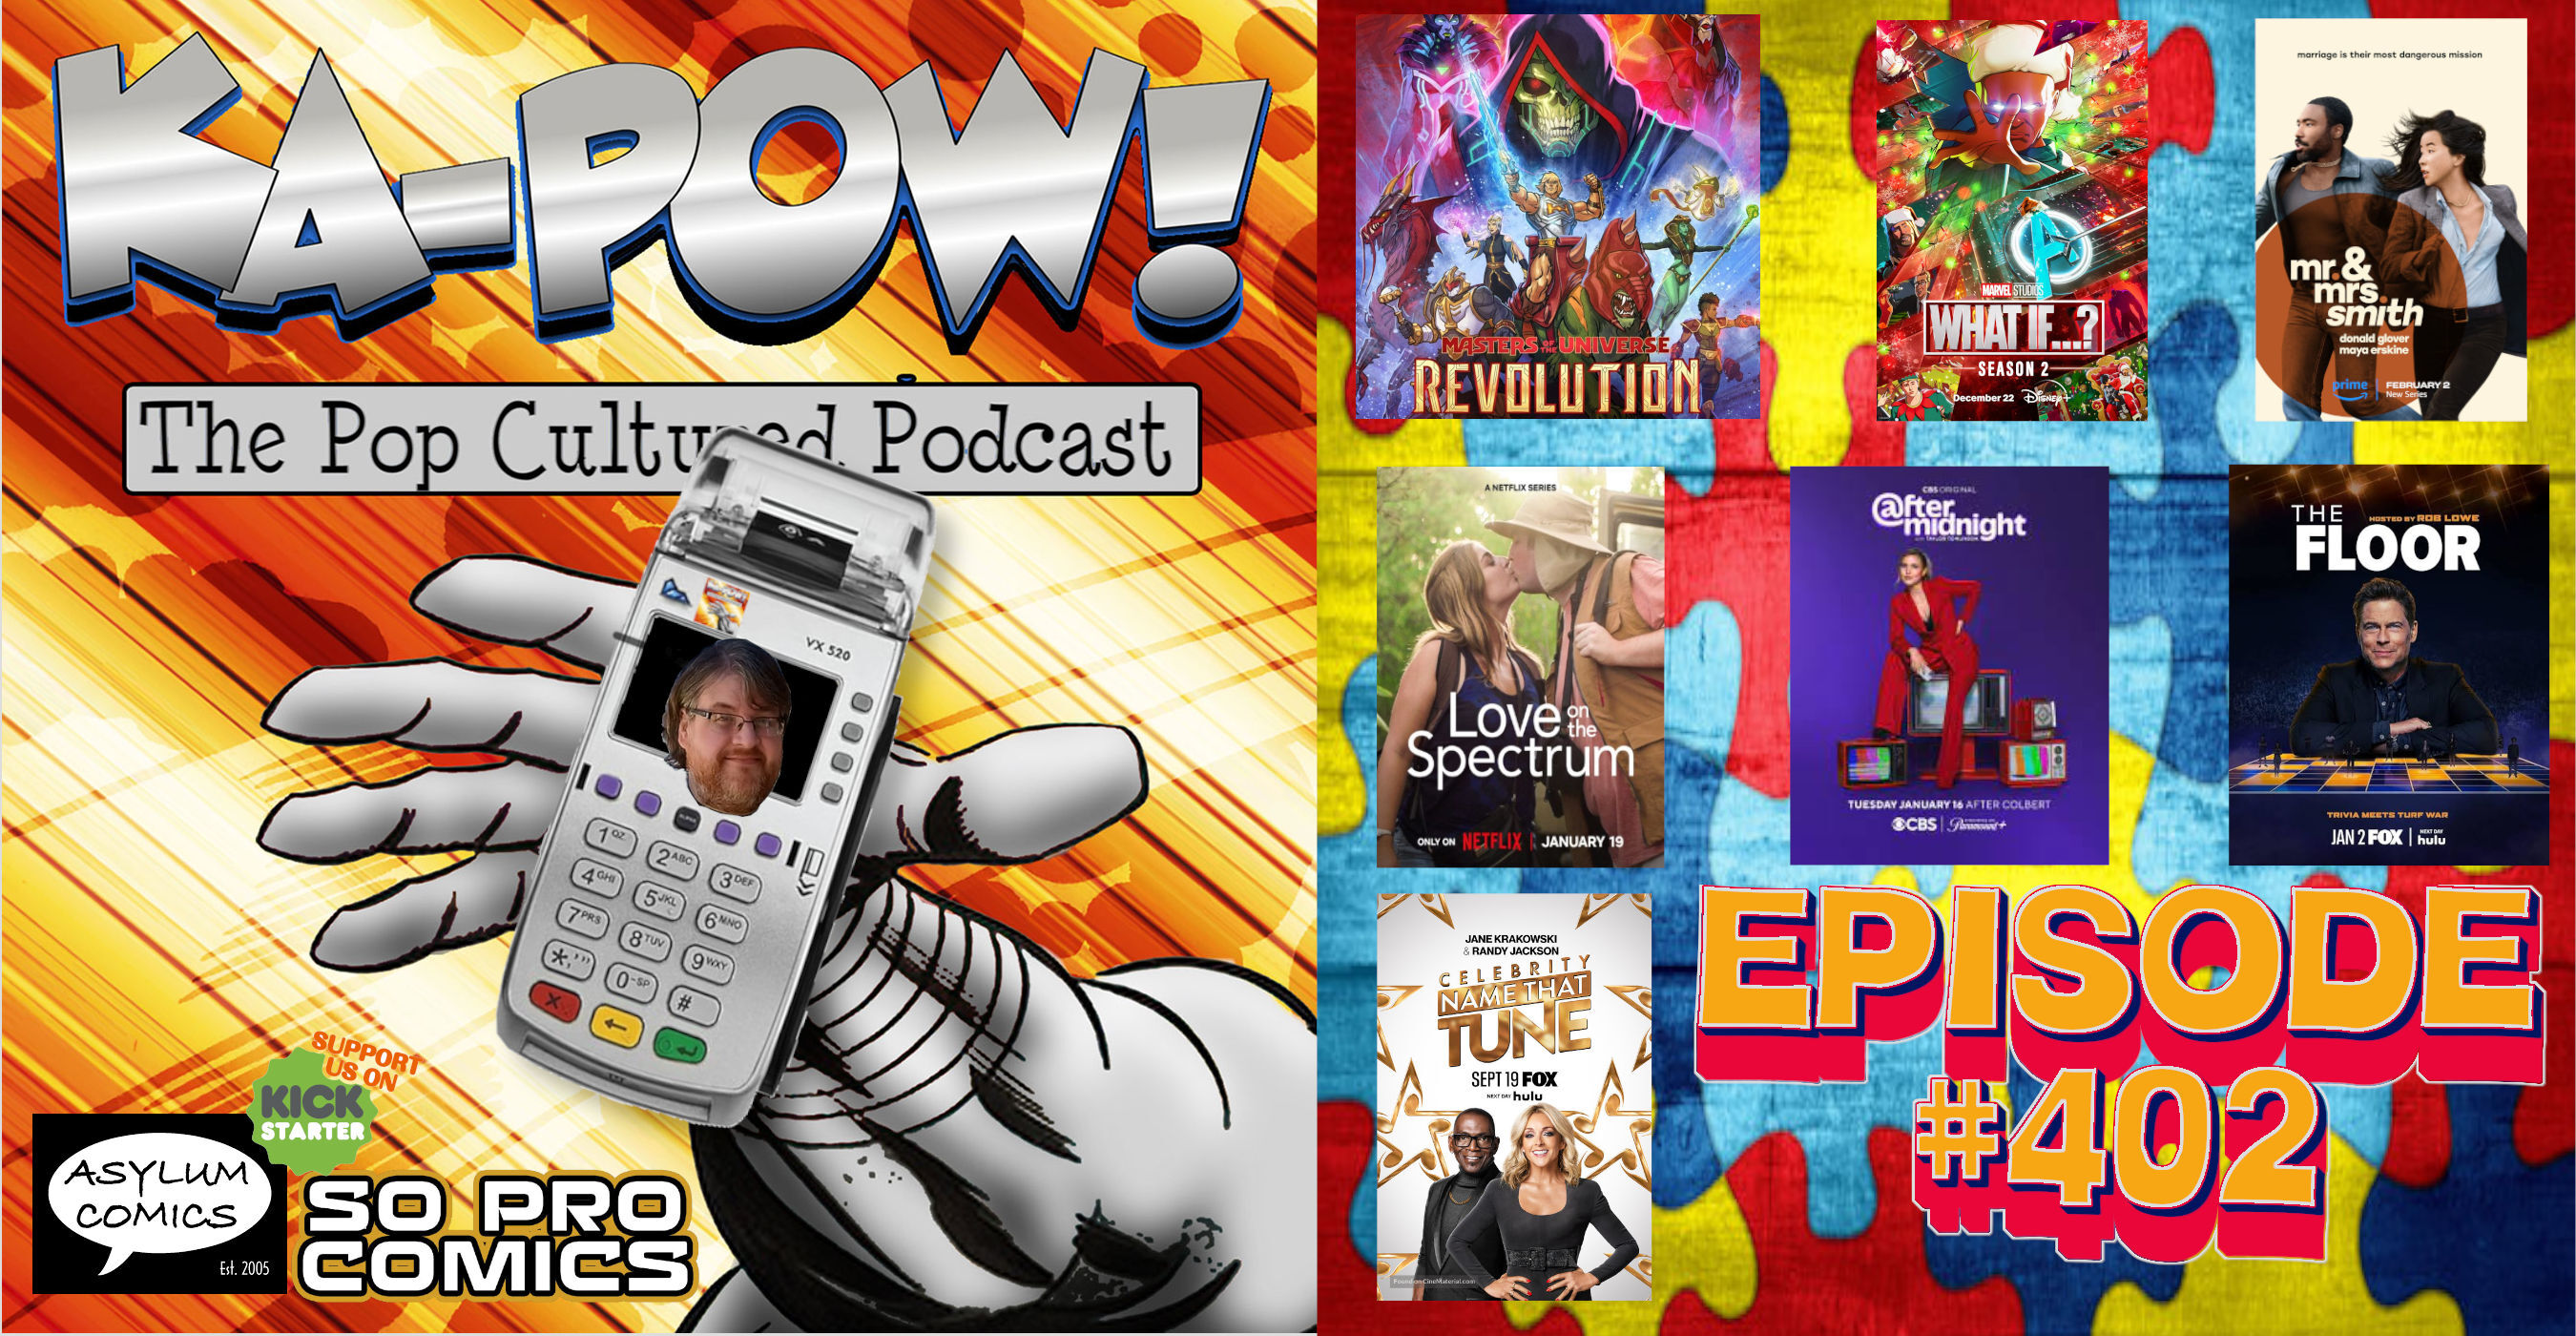 Ka-Pow the Pop Cultured Podcast #402 Oops, All Bangers